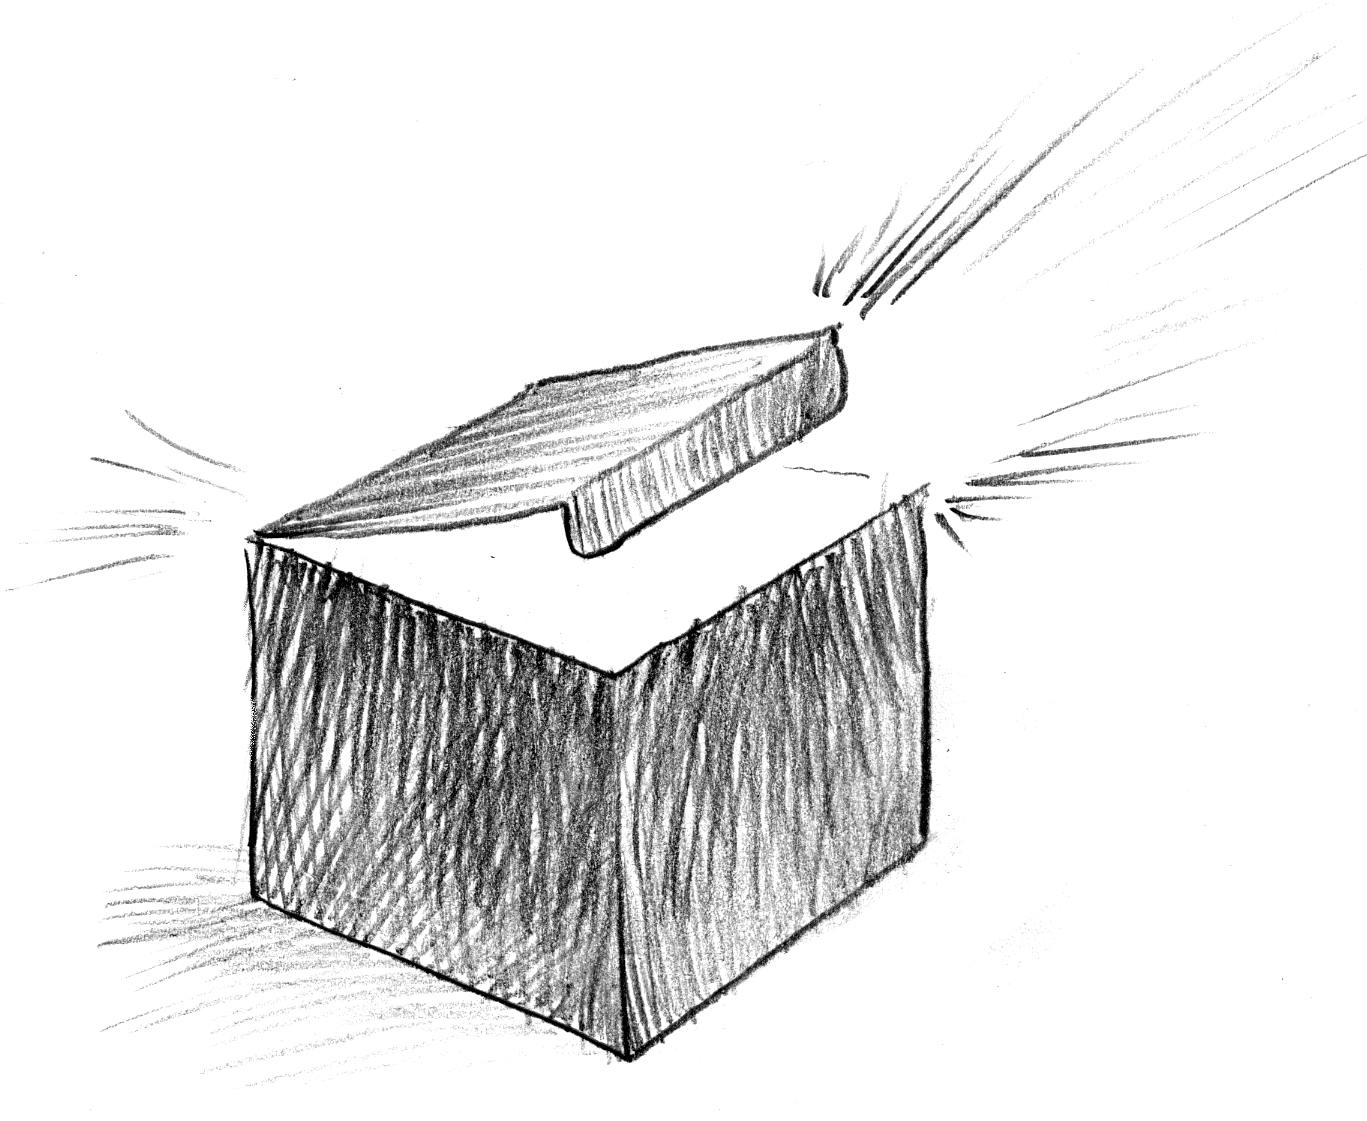 A small box, its lid slightly open, with golden light pouring out